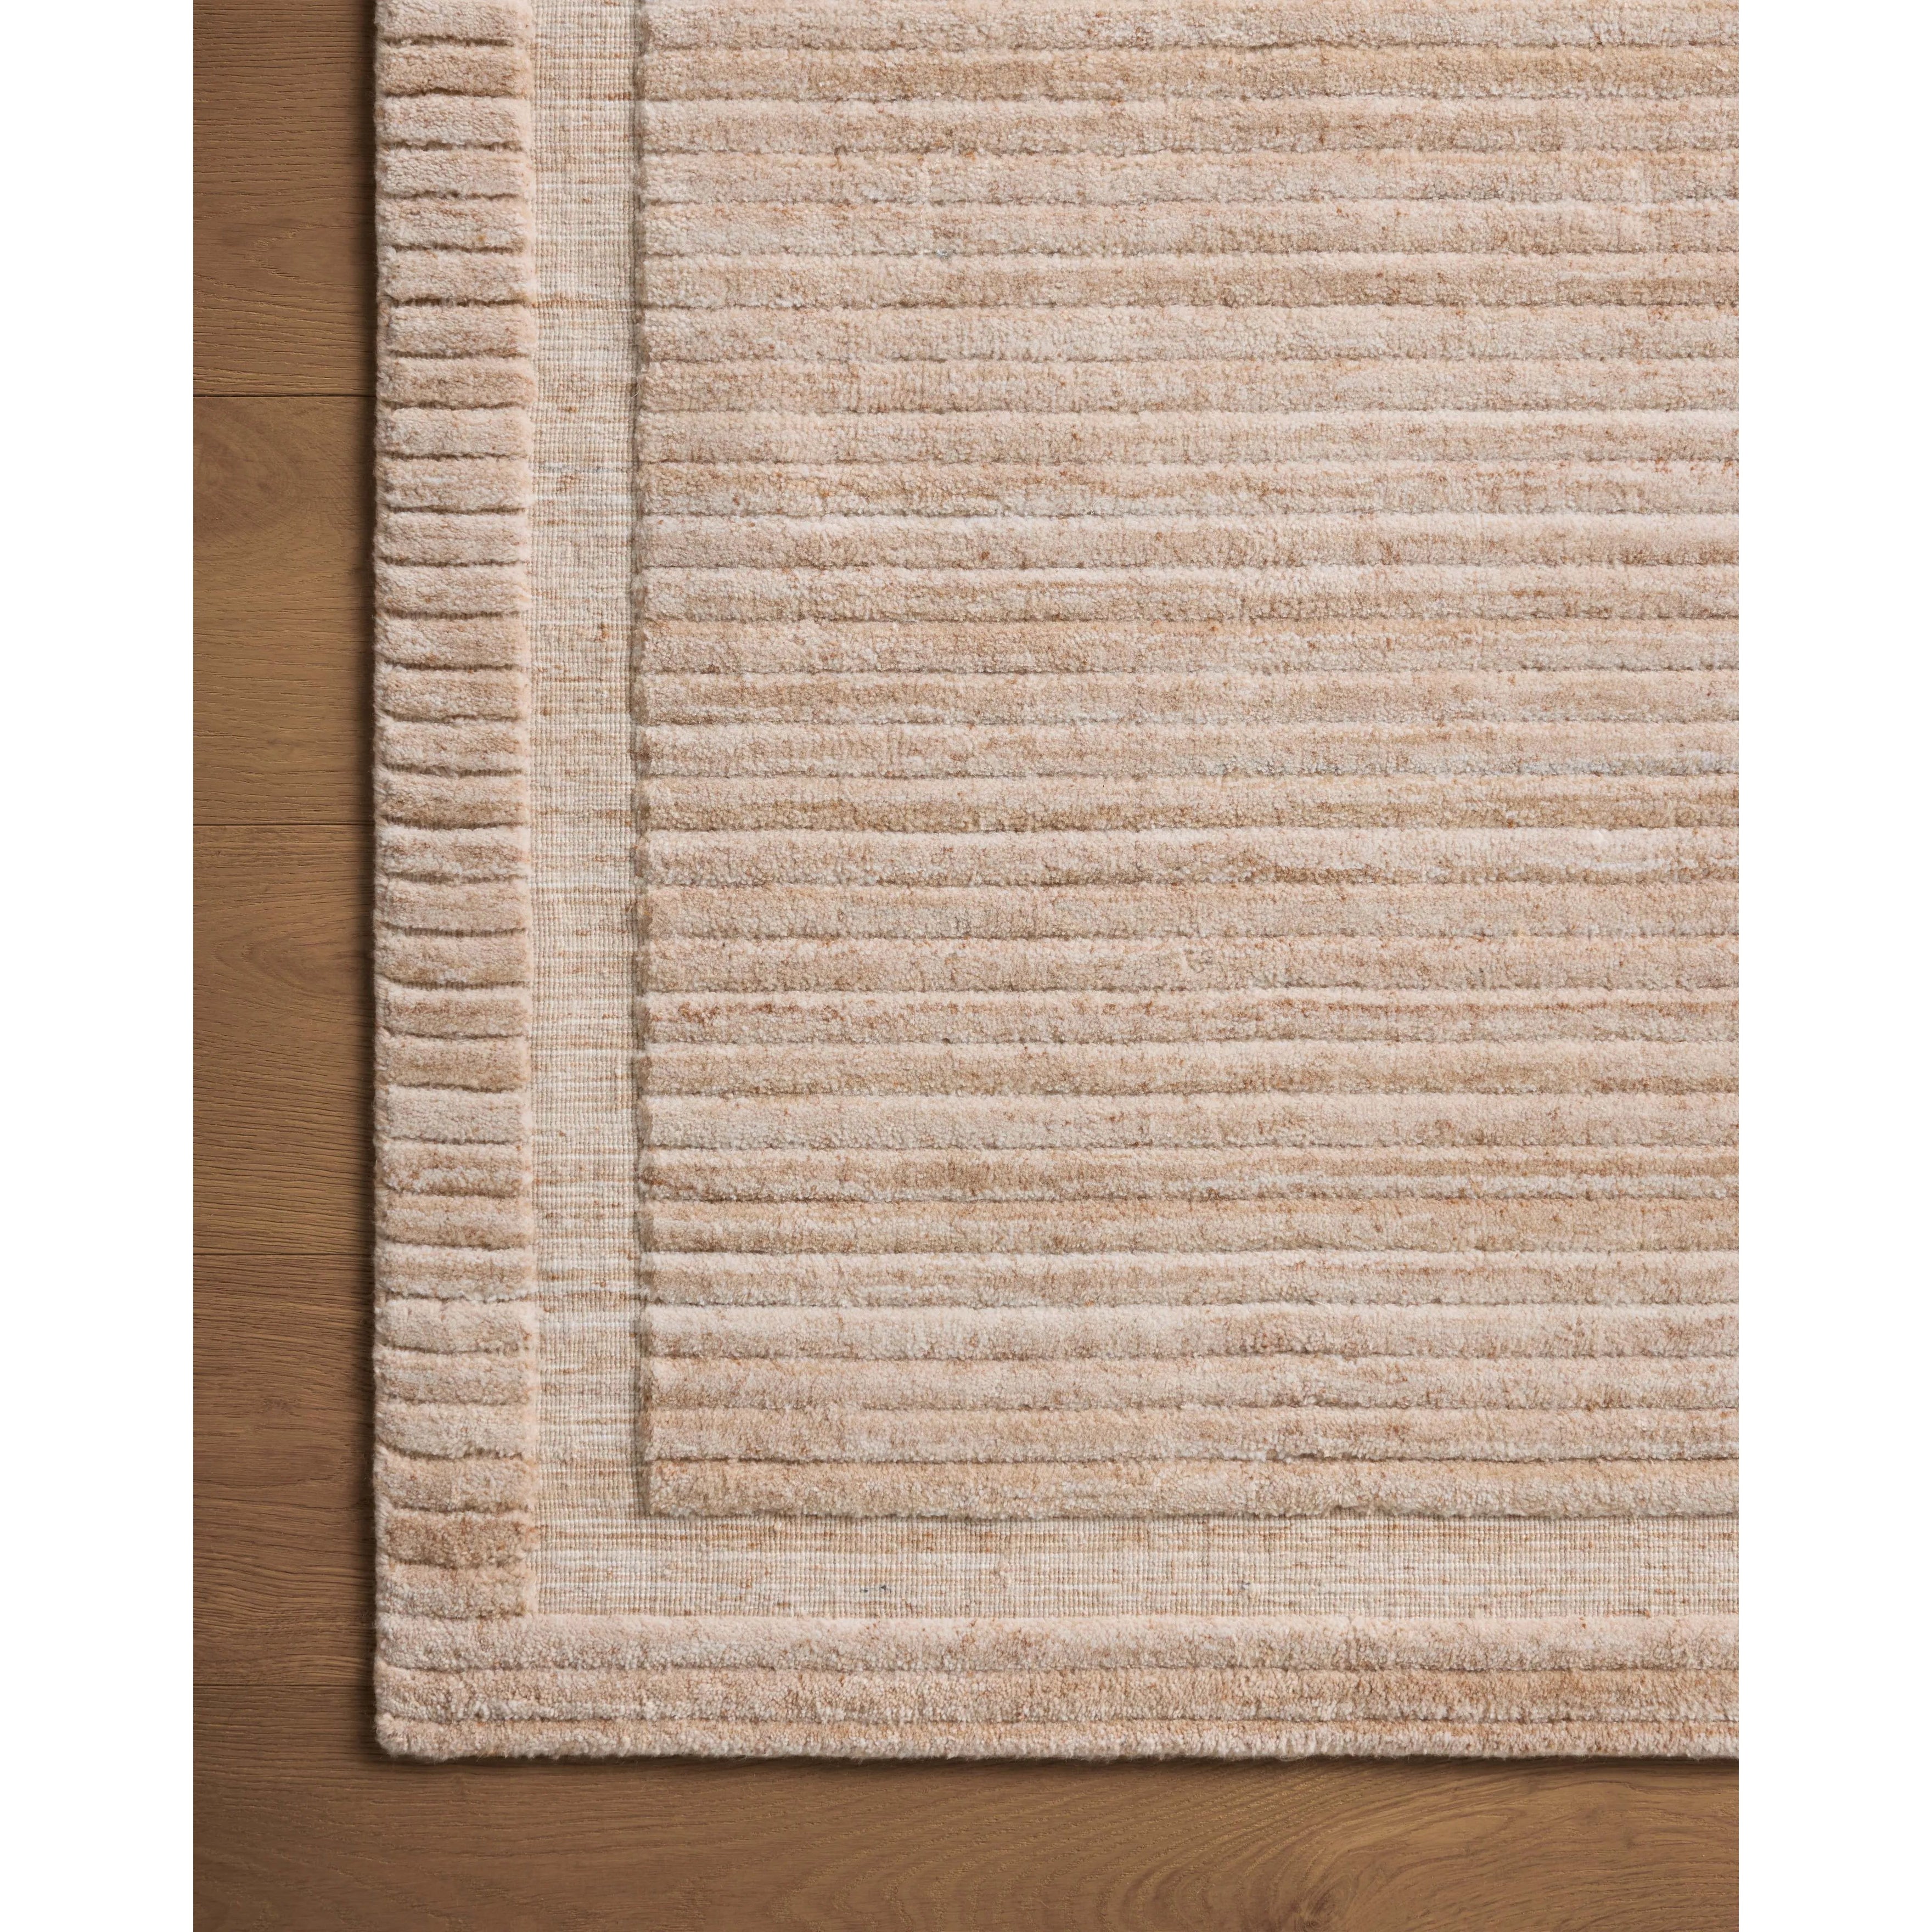 Irresistible to walk upon, the Dana Clay Rug by Brigette Romanek x Loloi has a high-low texture that alternates between a subtly shaggy pile and a soft base. Horizontal broken stripes give the area rug a fresh and energized structure, while a finish of fringe along the edges accentuates its sense of movement. Amethyst Home provides interior design, new home construction design consulting, vintage area rugs, and lighting in the Houston metro area.